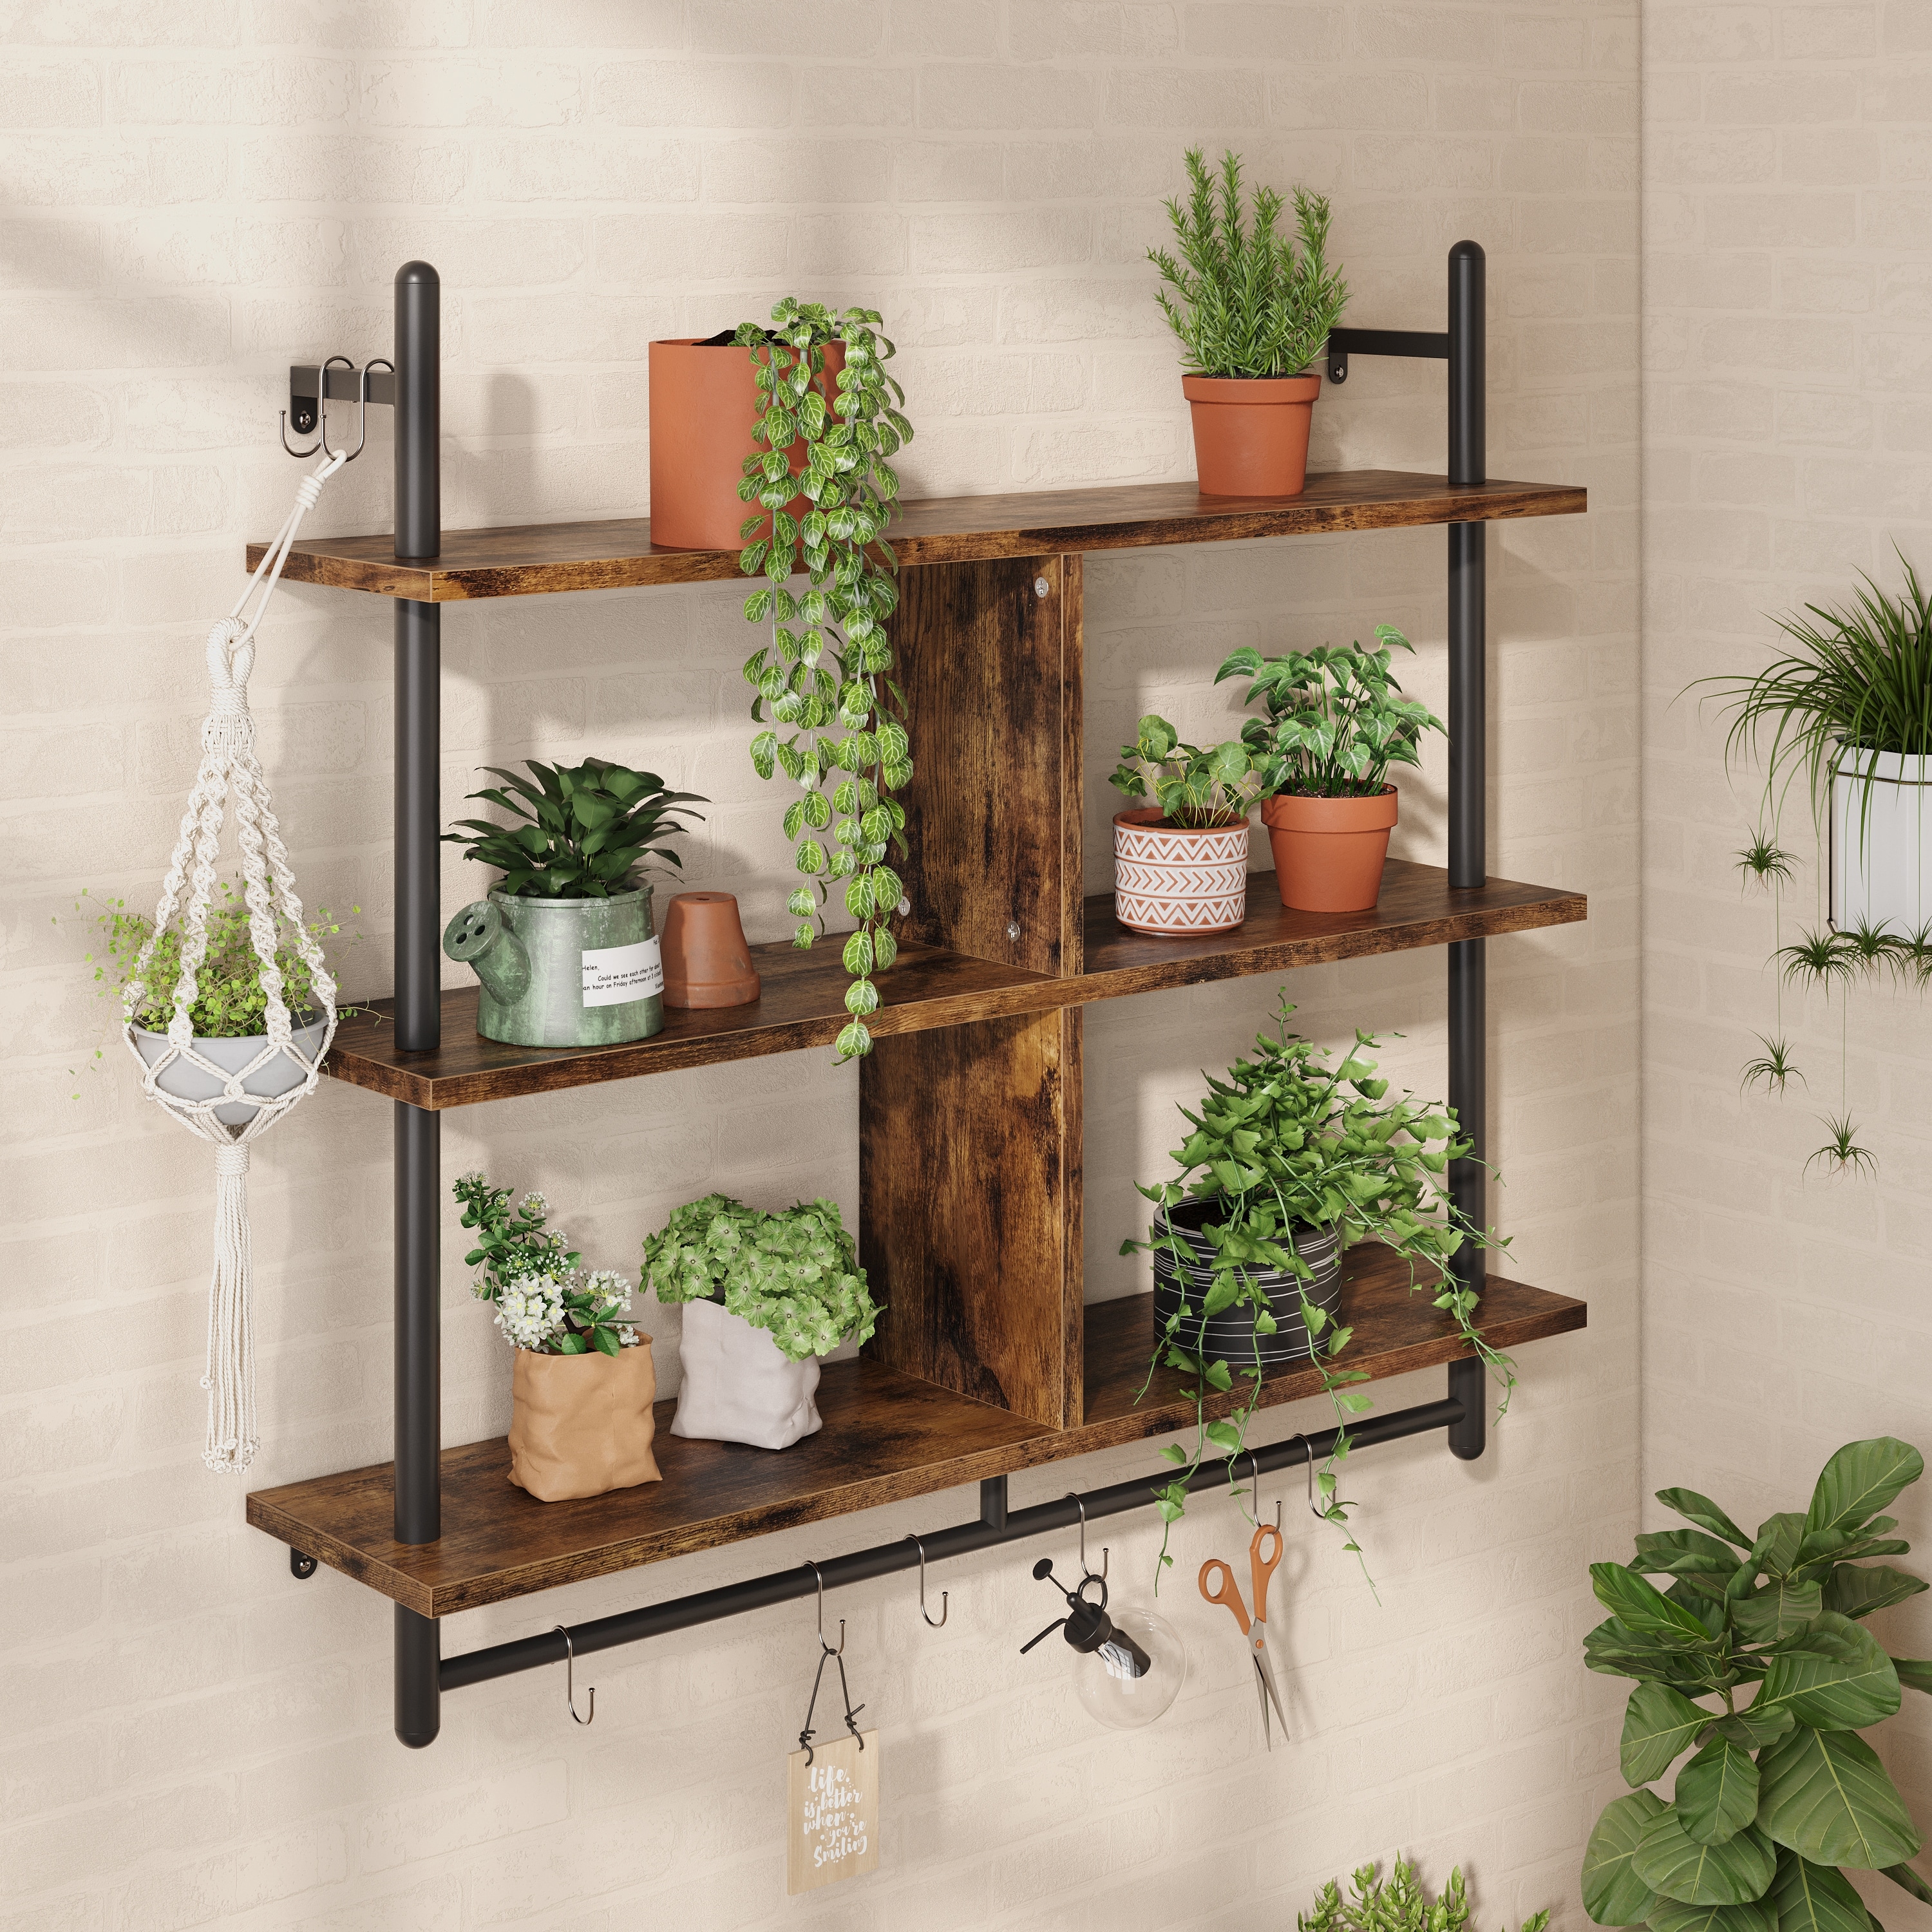 https://ak1.ostkcdn.com/images/products/is/images/direct/a0b05127c739418f0d11766c1d12541ff4c1d630/41-inch-Wall-Shelves-3-tiers-Floating-Shelf.jpg